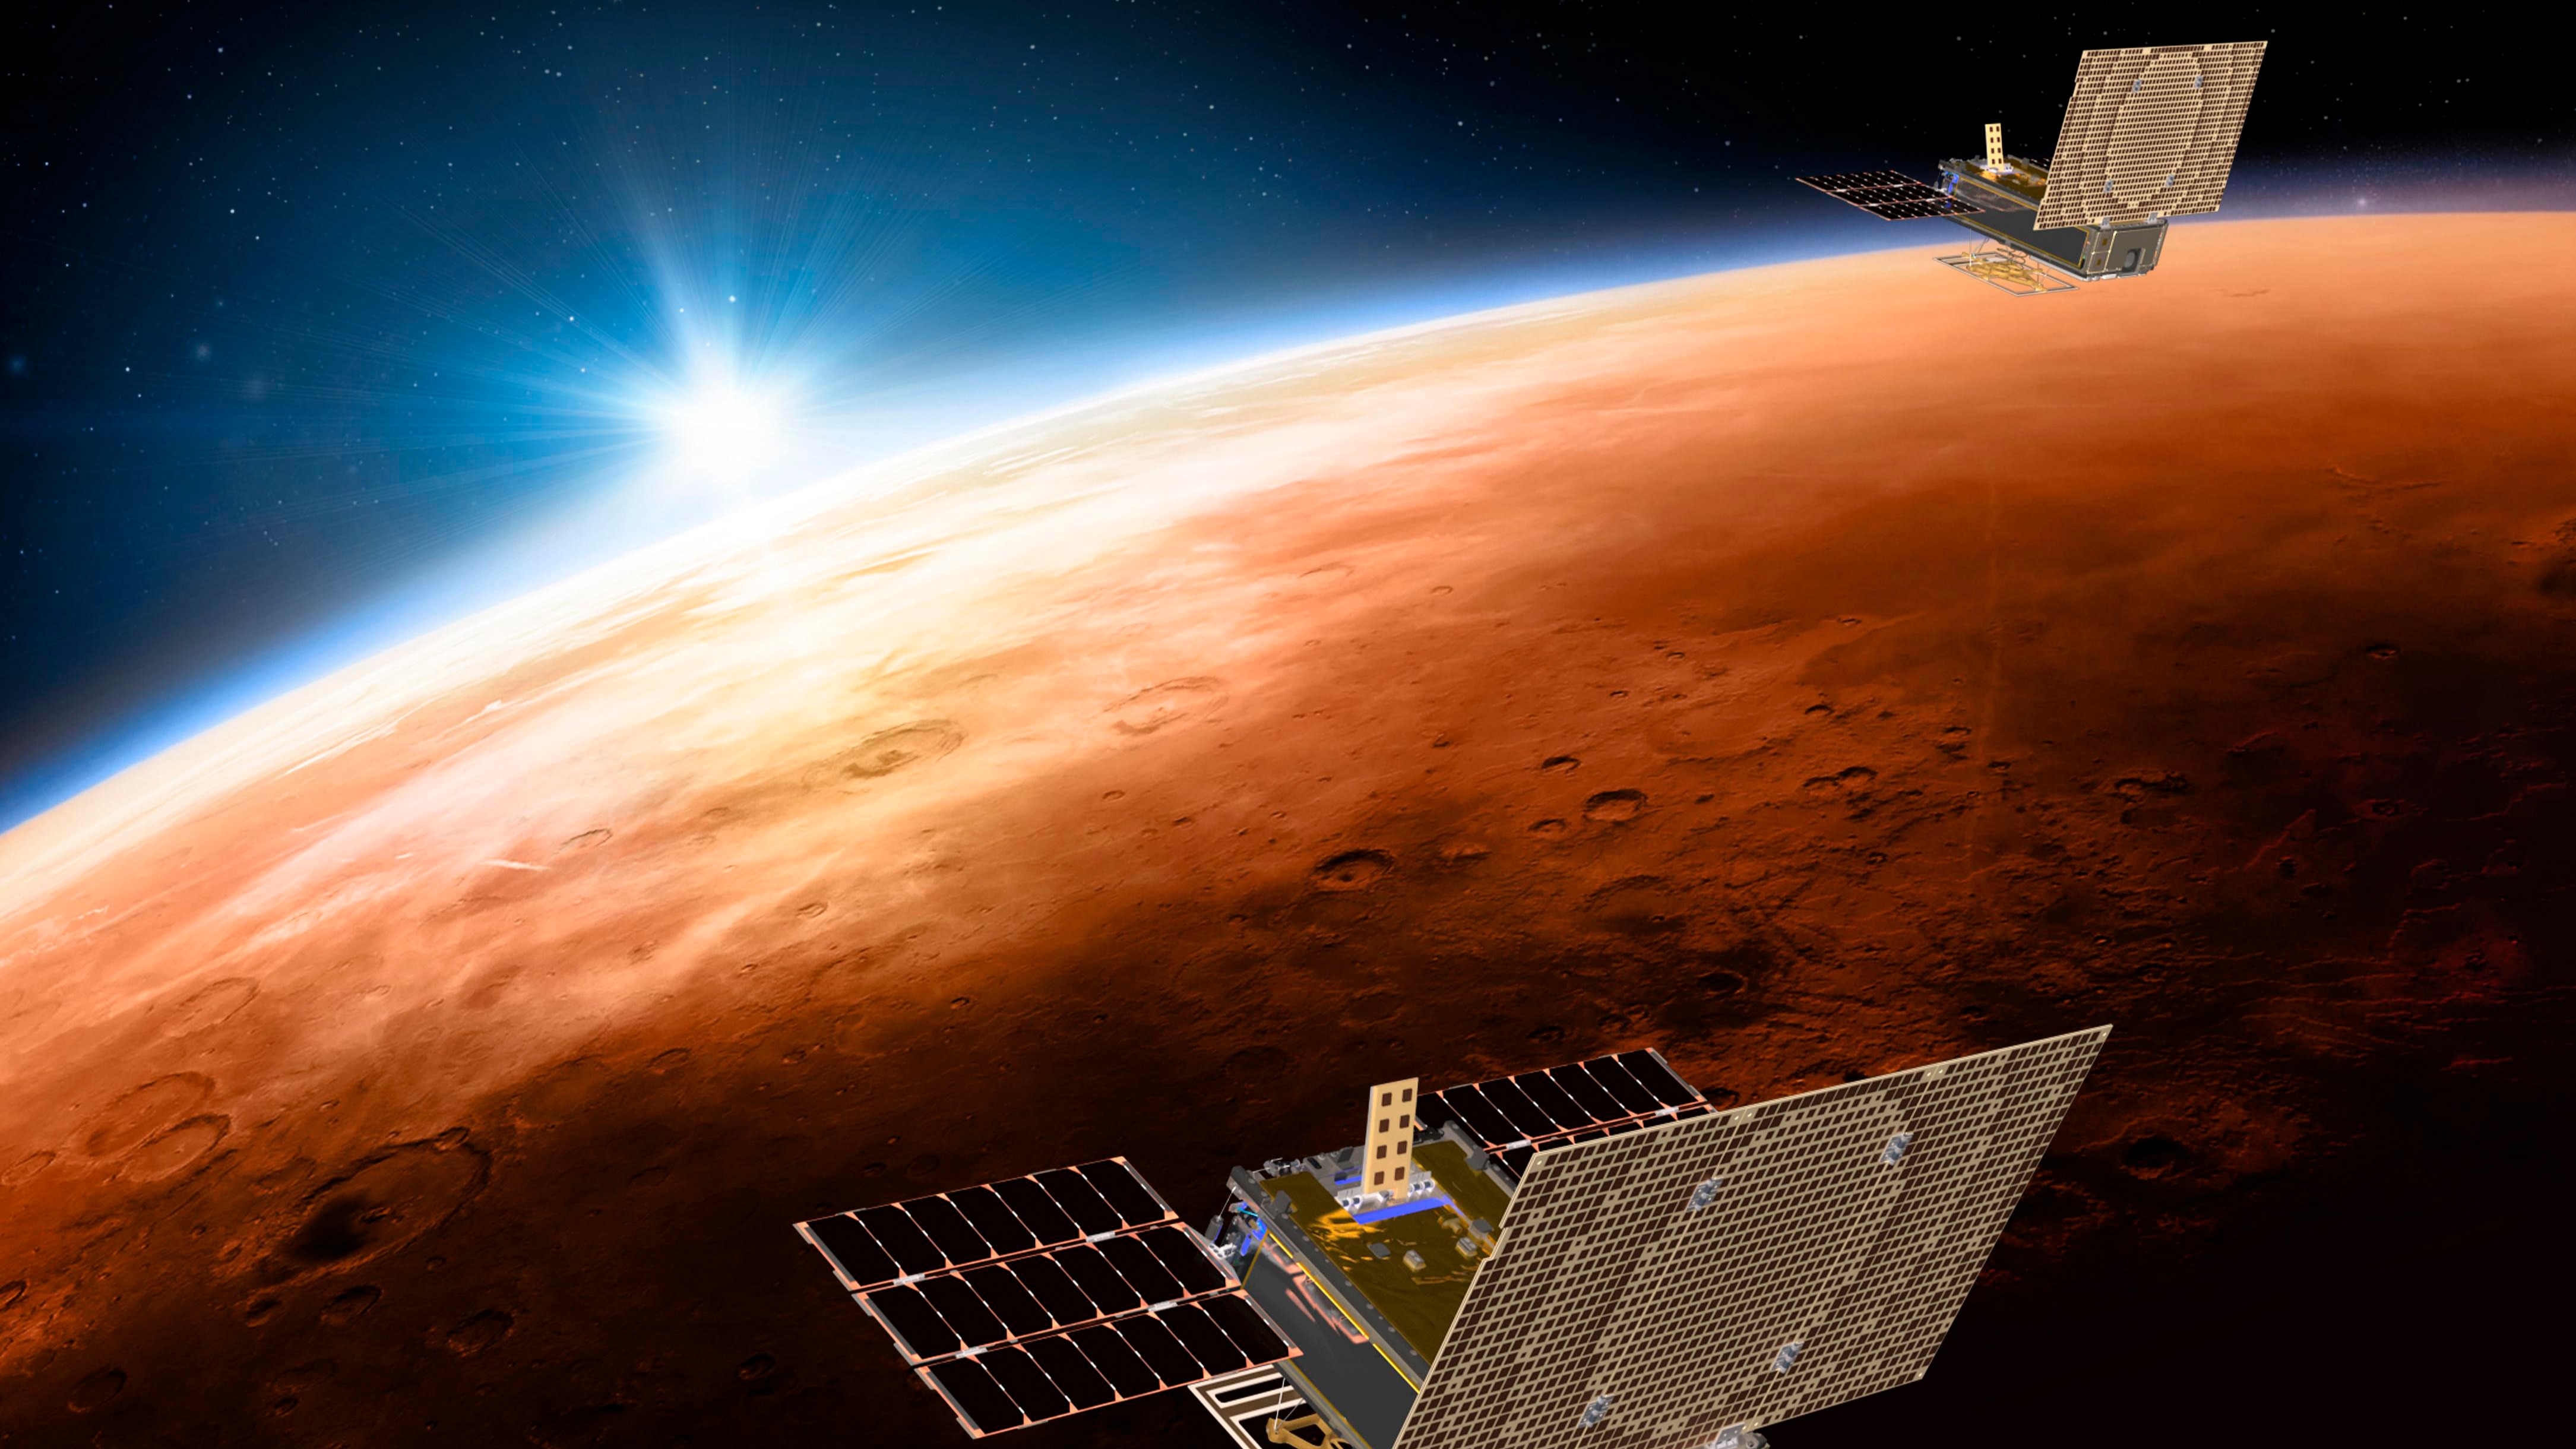 Mars to be at its 'biggest and brightest' as it aligns with Earth | ITV News